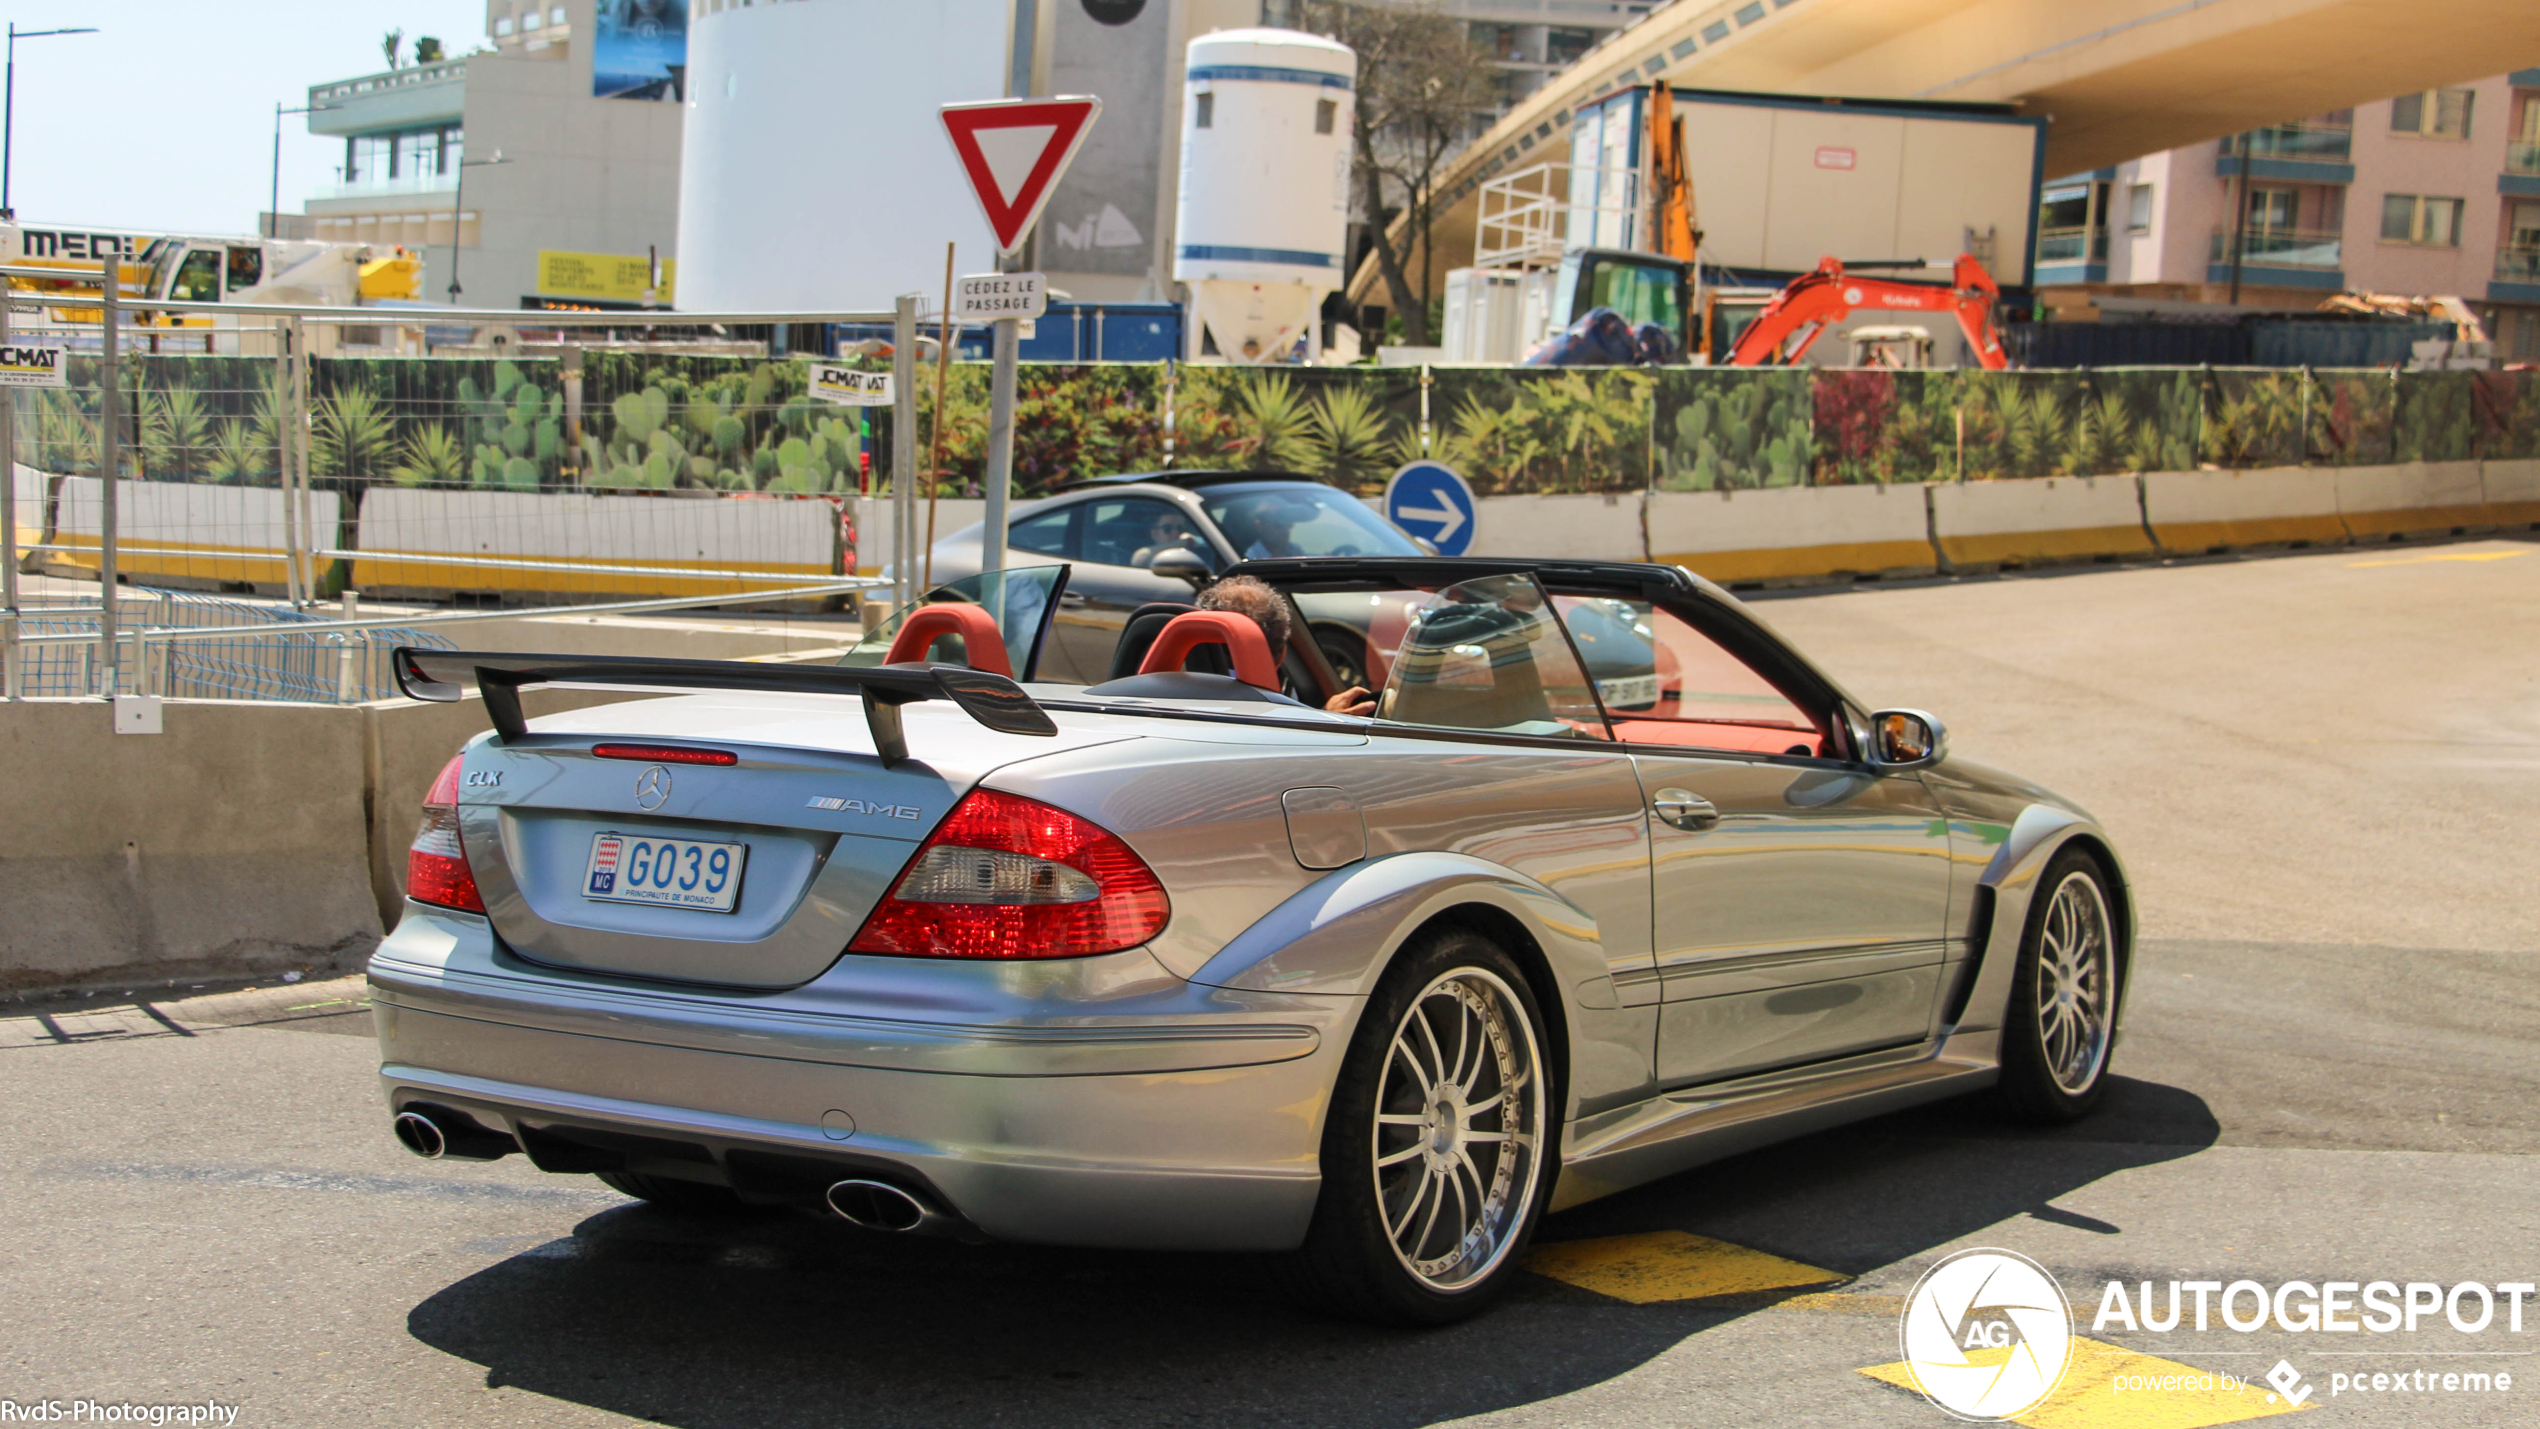 Mercedes-Benz CLK DTM AMG is also a permanent resident of Monaco